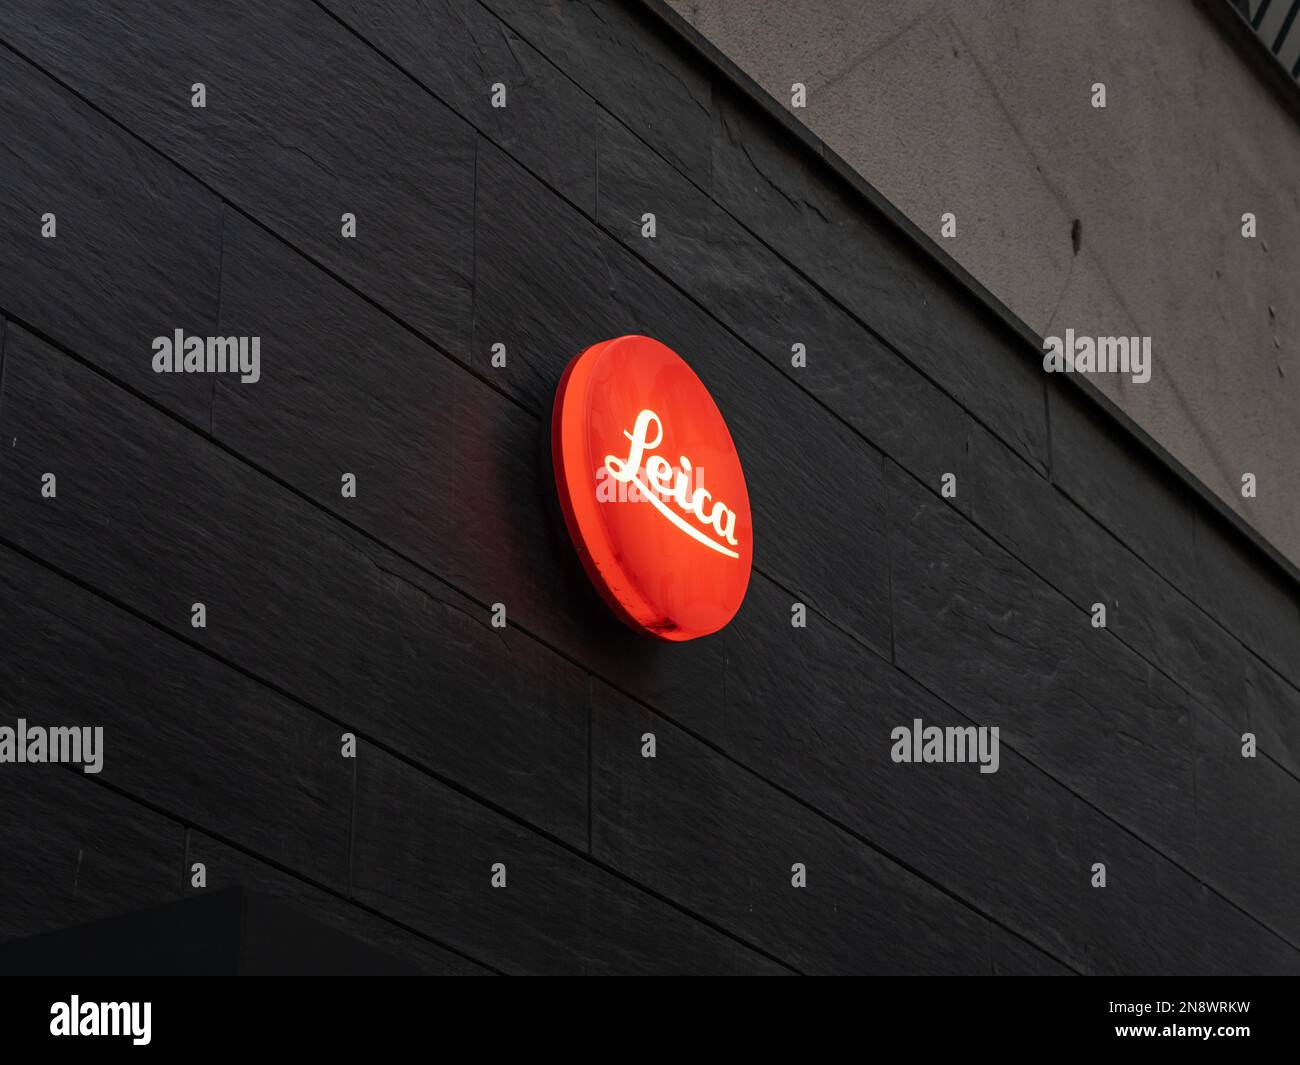 Leica store logo of the famous German camera and lens manufacturer. Illuminated brand sign in red color on the facade. High quality products. Stock Photo